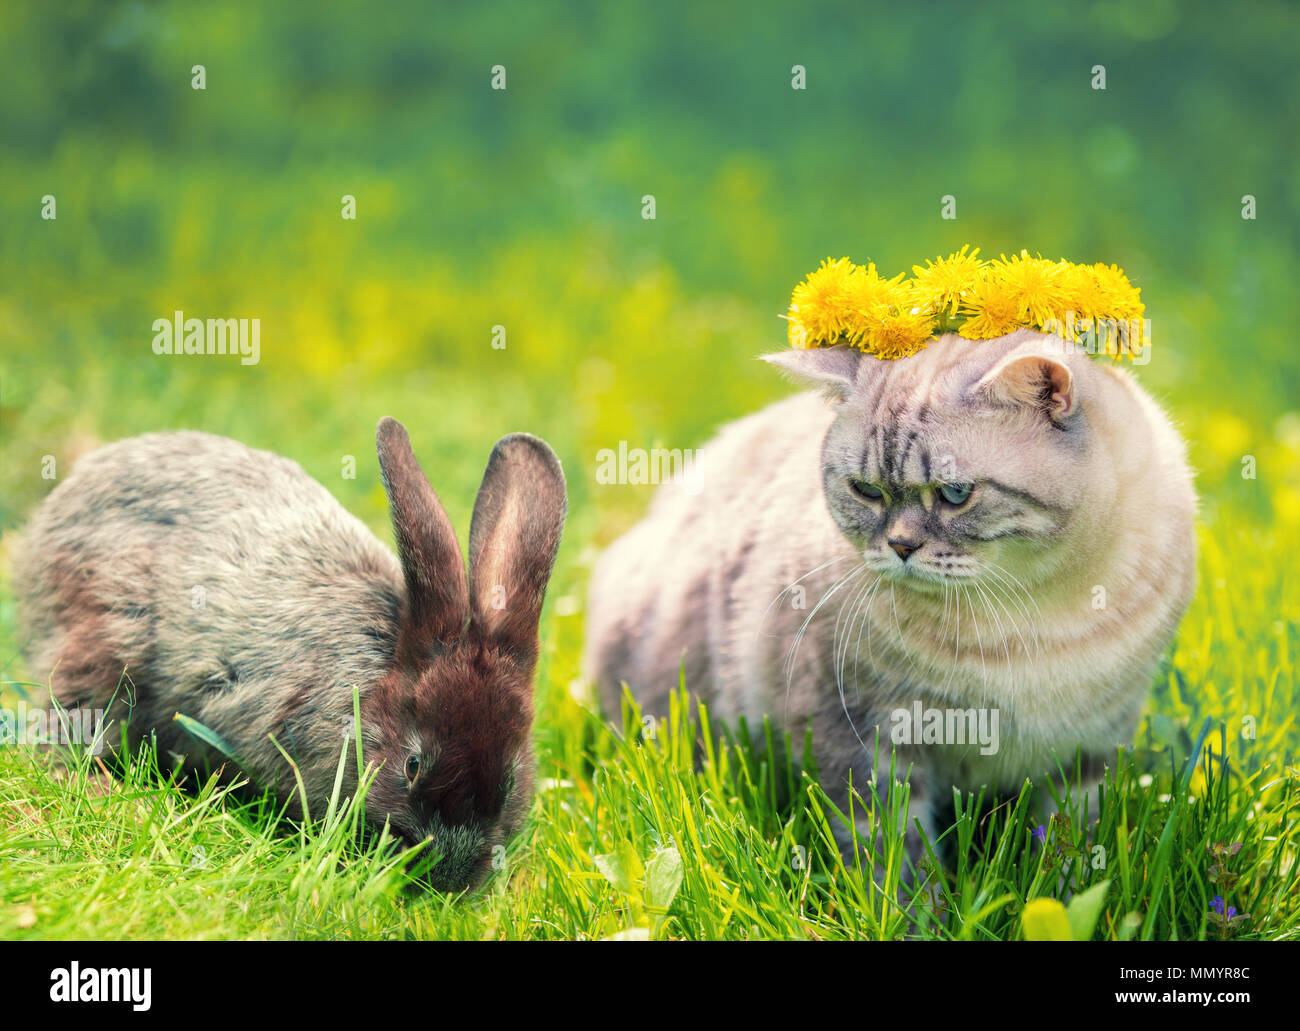 White cat and brown rabbit sitting together on green grass in spring. Easter concept. Cat crowned with dandelion chaplet Stock Photo